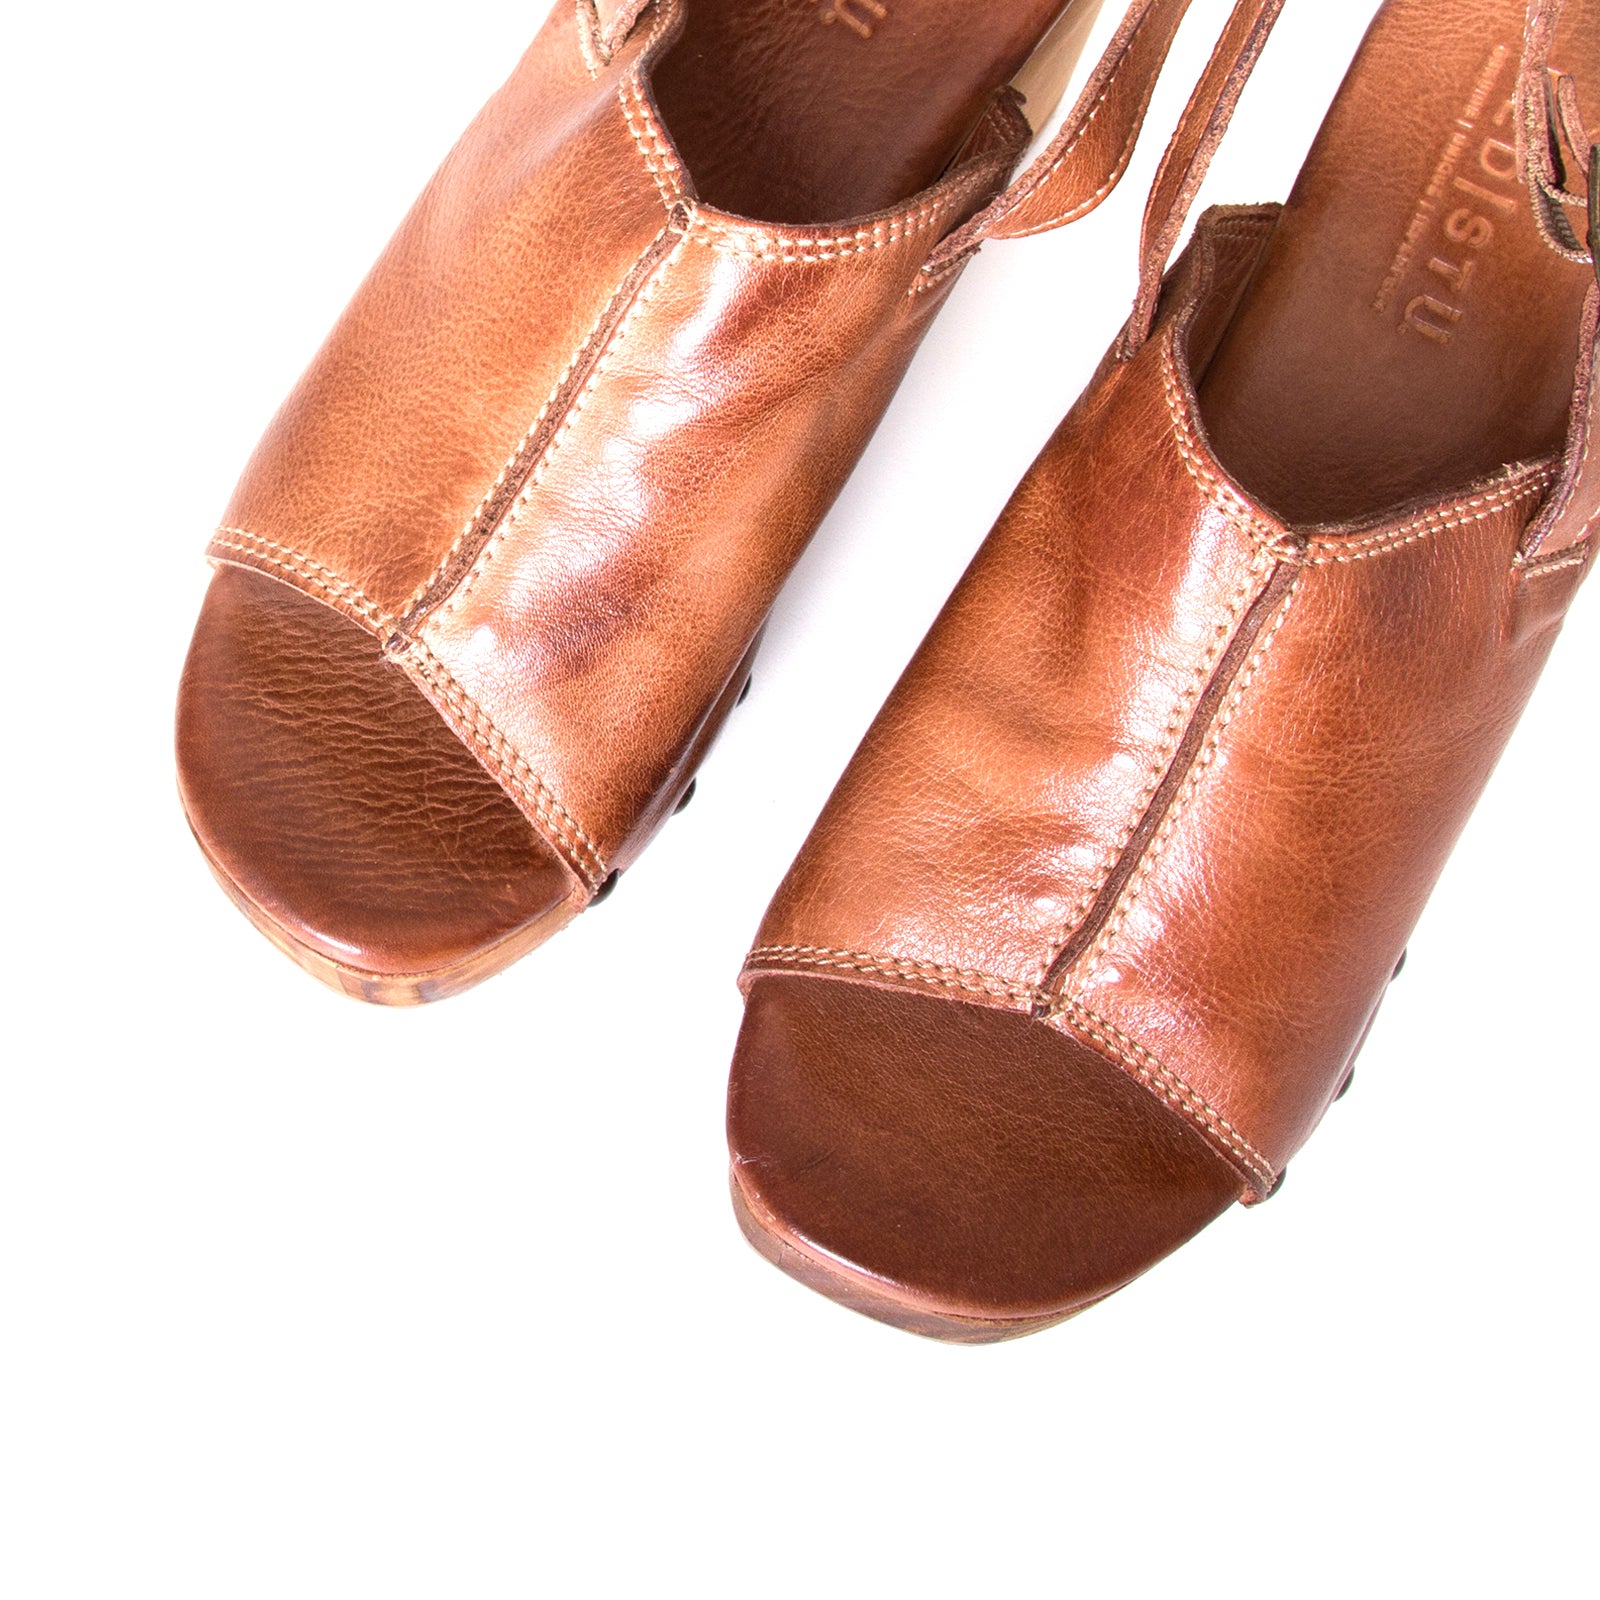 Bed Stu Marie. Women's wooden clog in tan leather, with slingback. Top view, pair.